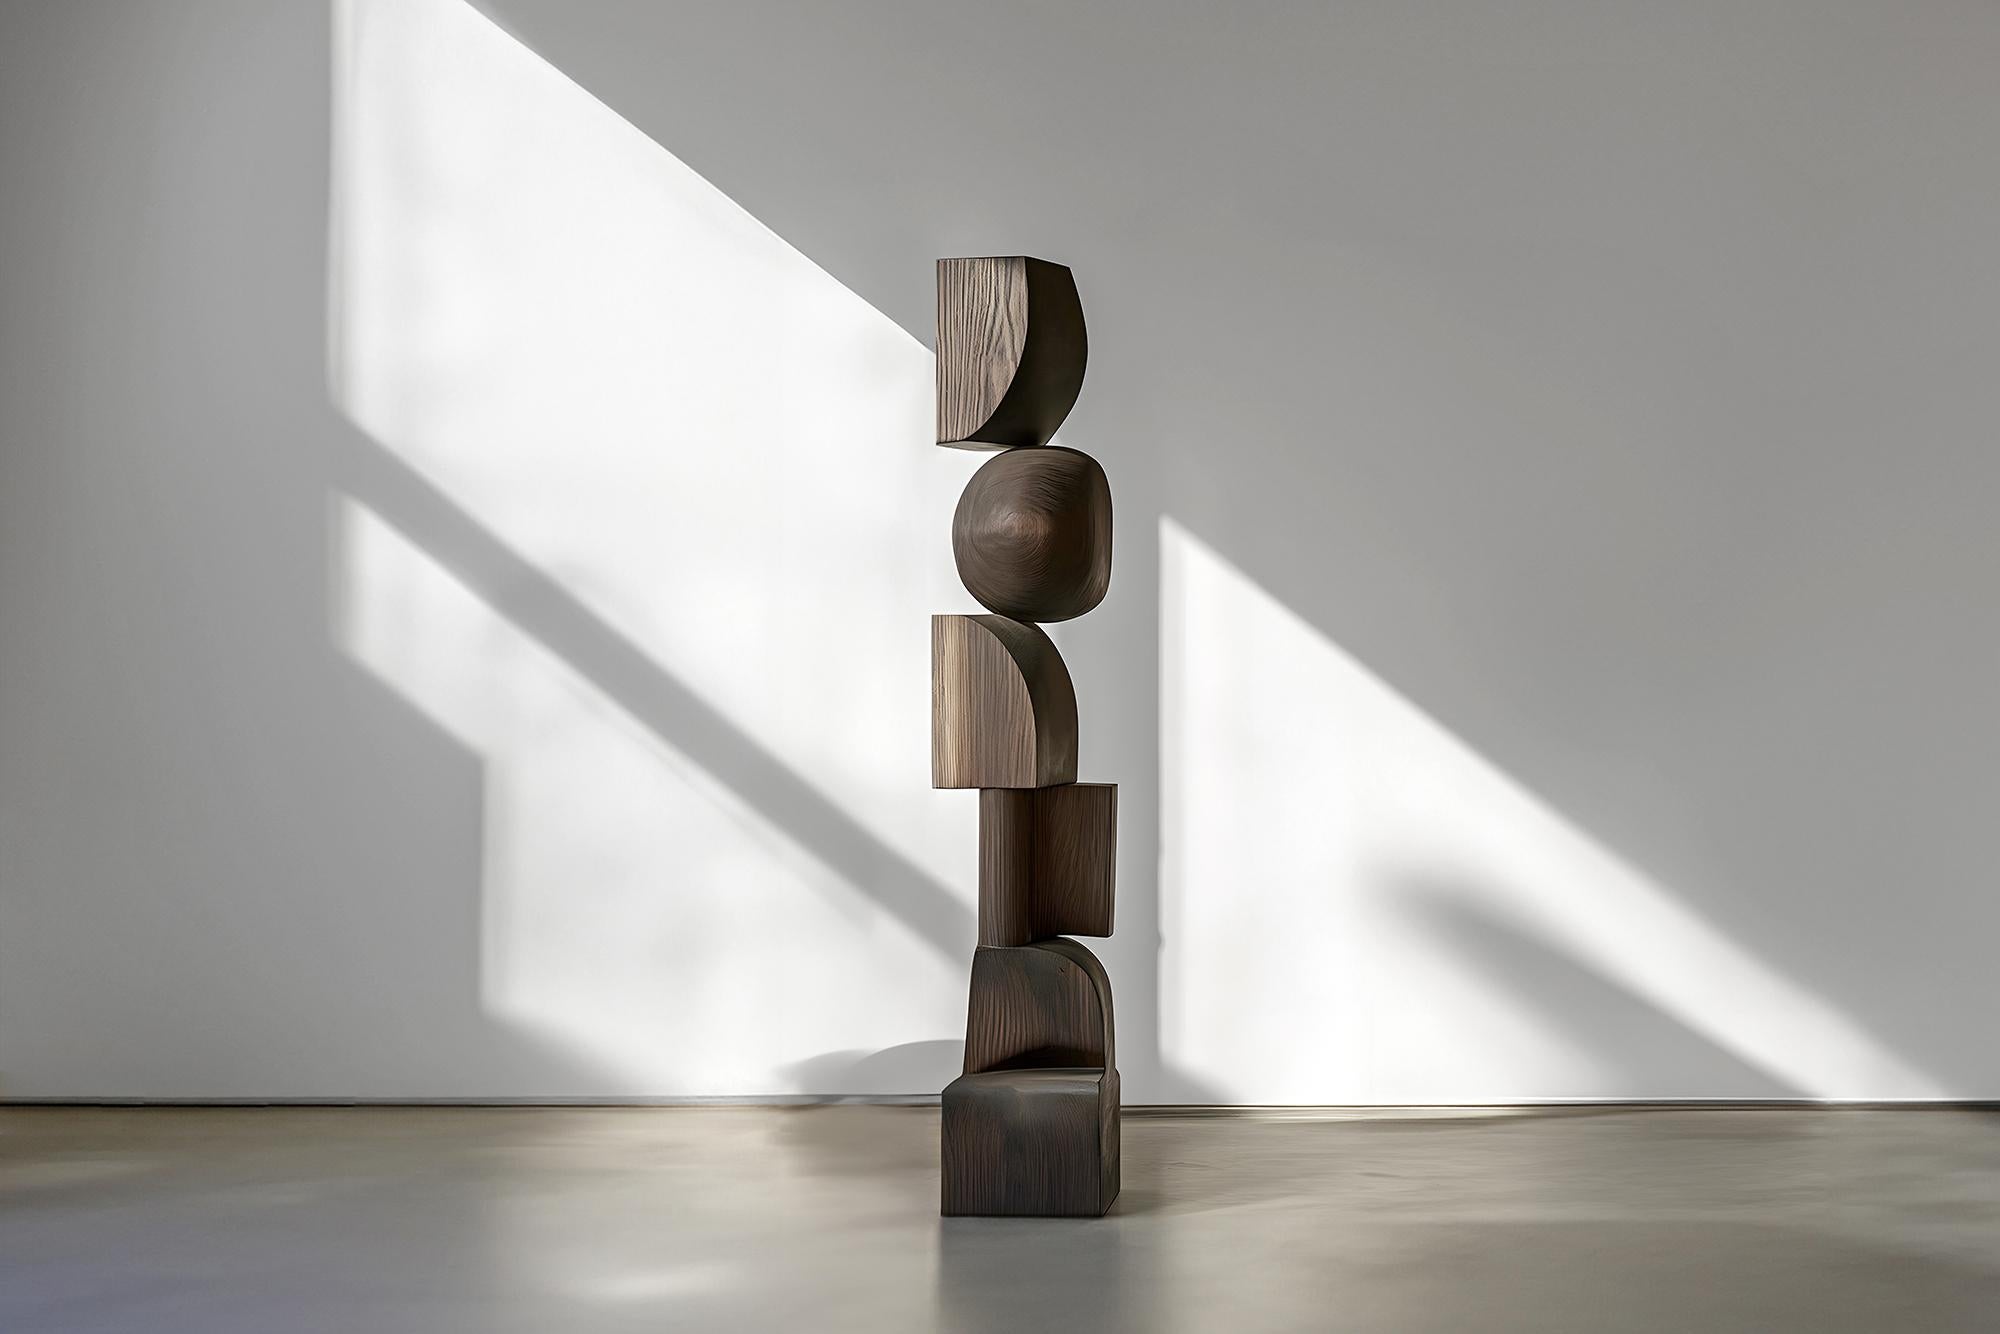 Elegant and Dark, the Biomorphic Burned Oak Sculpture by Joel Escalona, Still Stand No88

——


Joel Escalona's wooden standing sculptures are objects of raw beauty and serene grace. Each one is a testament to the power of the material, with smooth